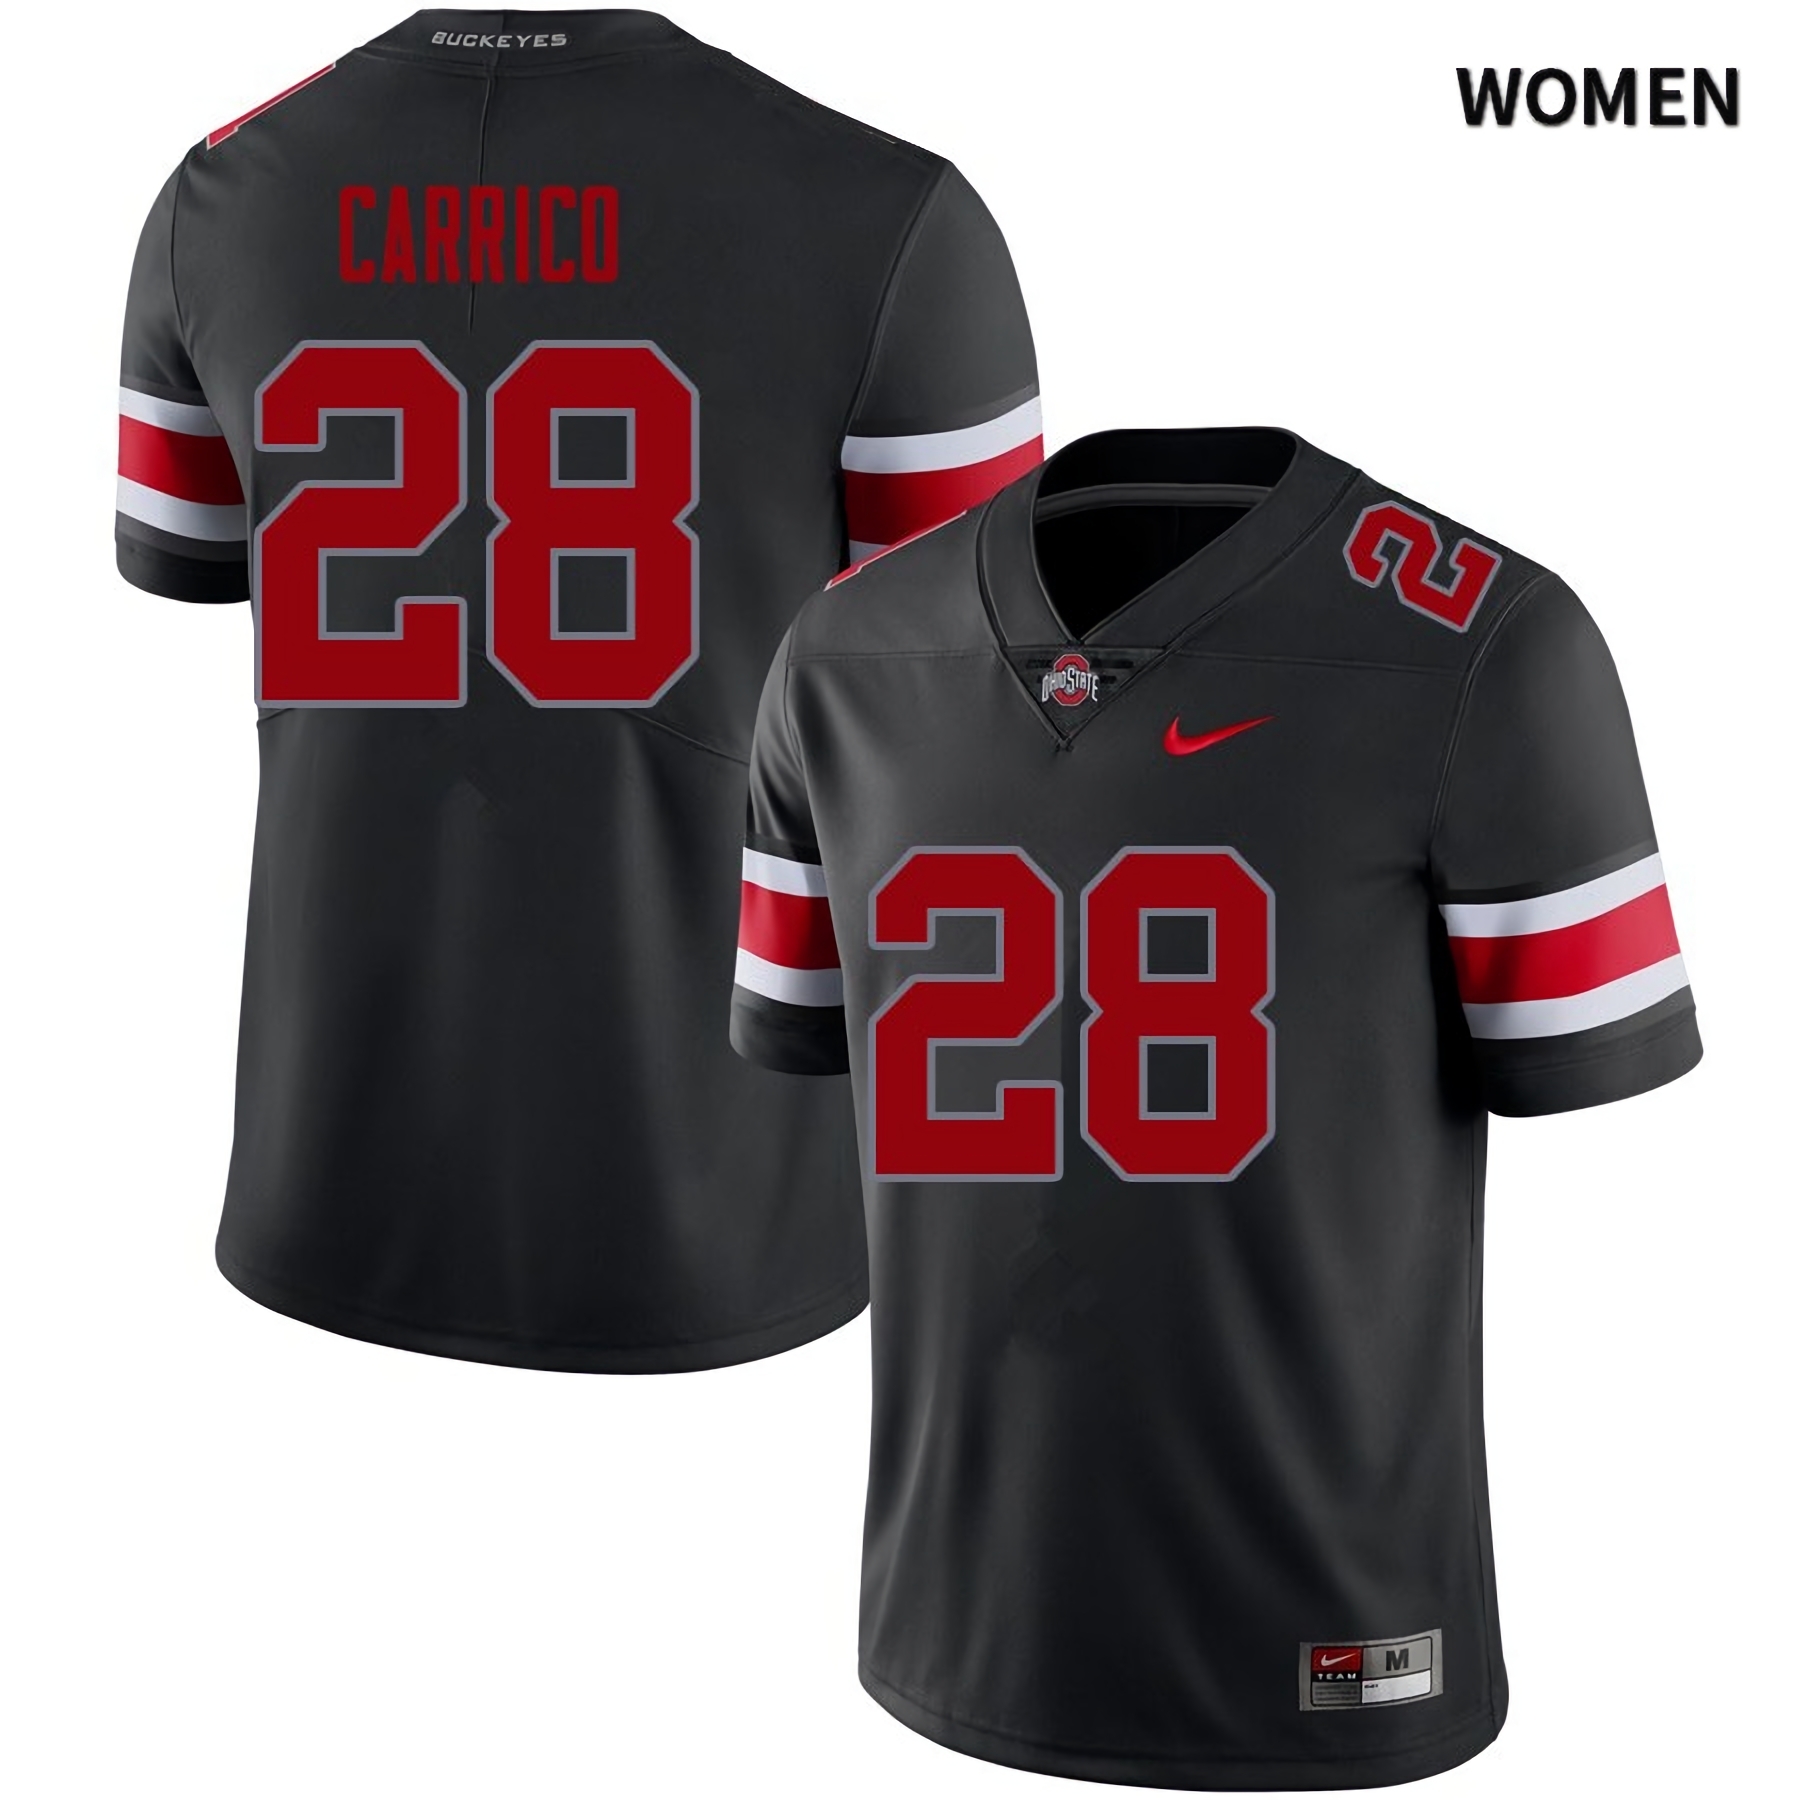 Reid Carrico Ohio State Buckeyes Women's NCAA #28 Black Red Number College Stitched Football Jersey RRY8556YG